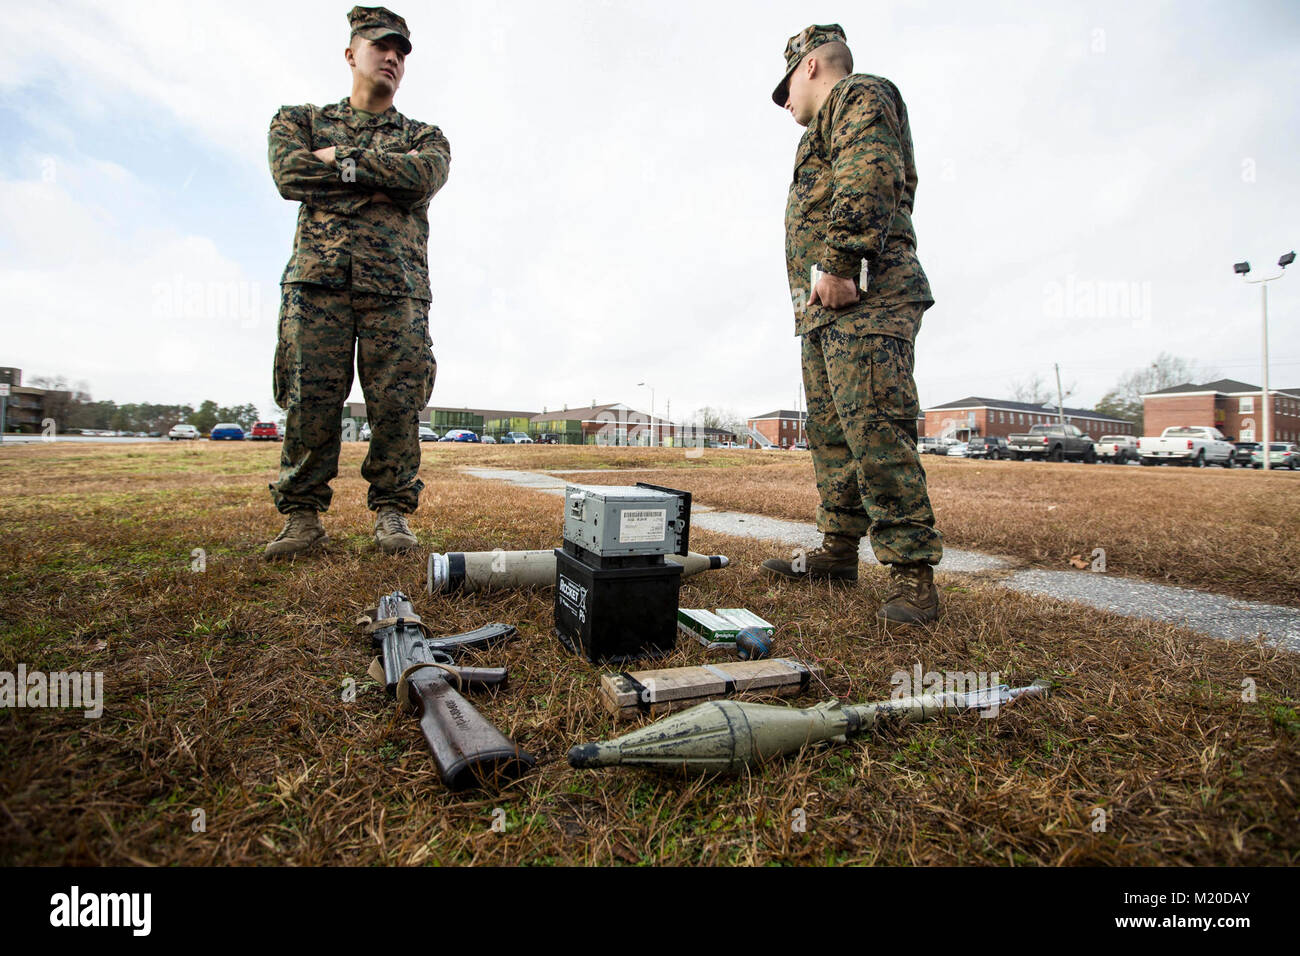 U.S. Marines with Battalion Landing Team, 2nd Battalion, 6th Marine Regiment, 26th Marine Expeditionary Unit (MEU), discuss their course of action during vehicle-borne improvised explosive device (VBIED) training on Camp Lejeune, N.C., Jan. 11, 2018. The two-day course was held to educate Marines on the proper procedures of inspecting vehicles and civilians for potential threats while also giving them the opportunity to practice techniques in preparation for the upcoming deployment. (U.S. Marine Corps Stock Photo